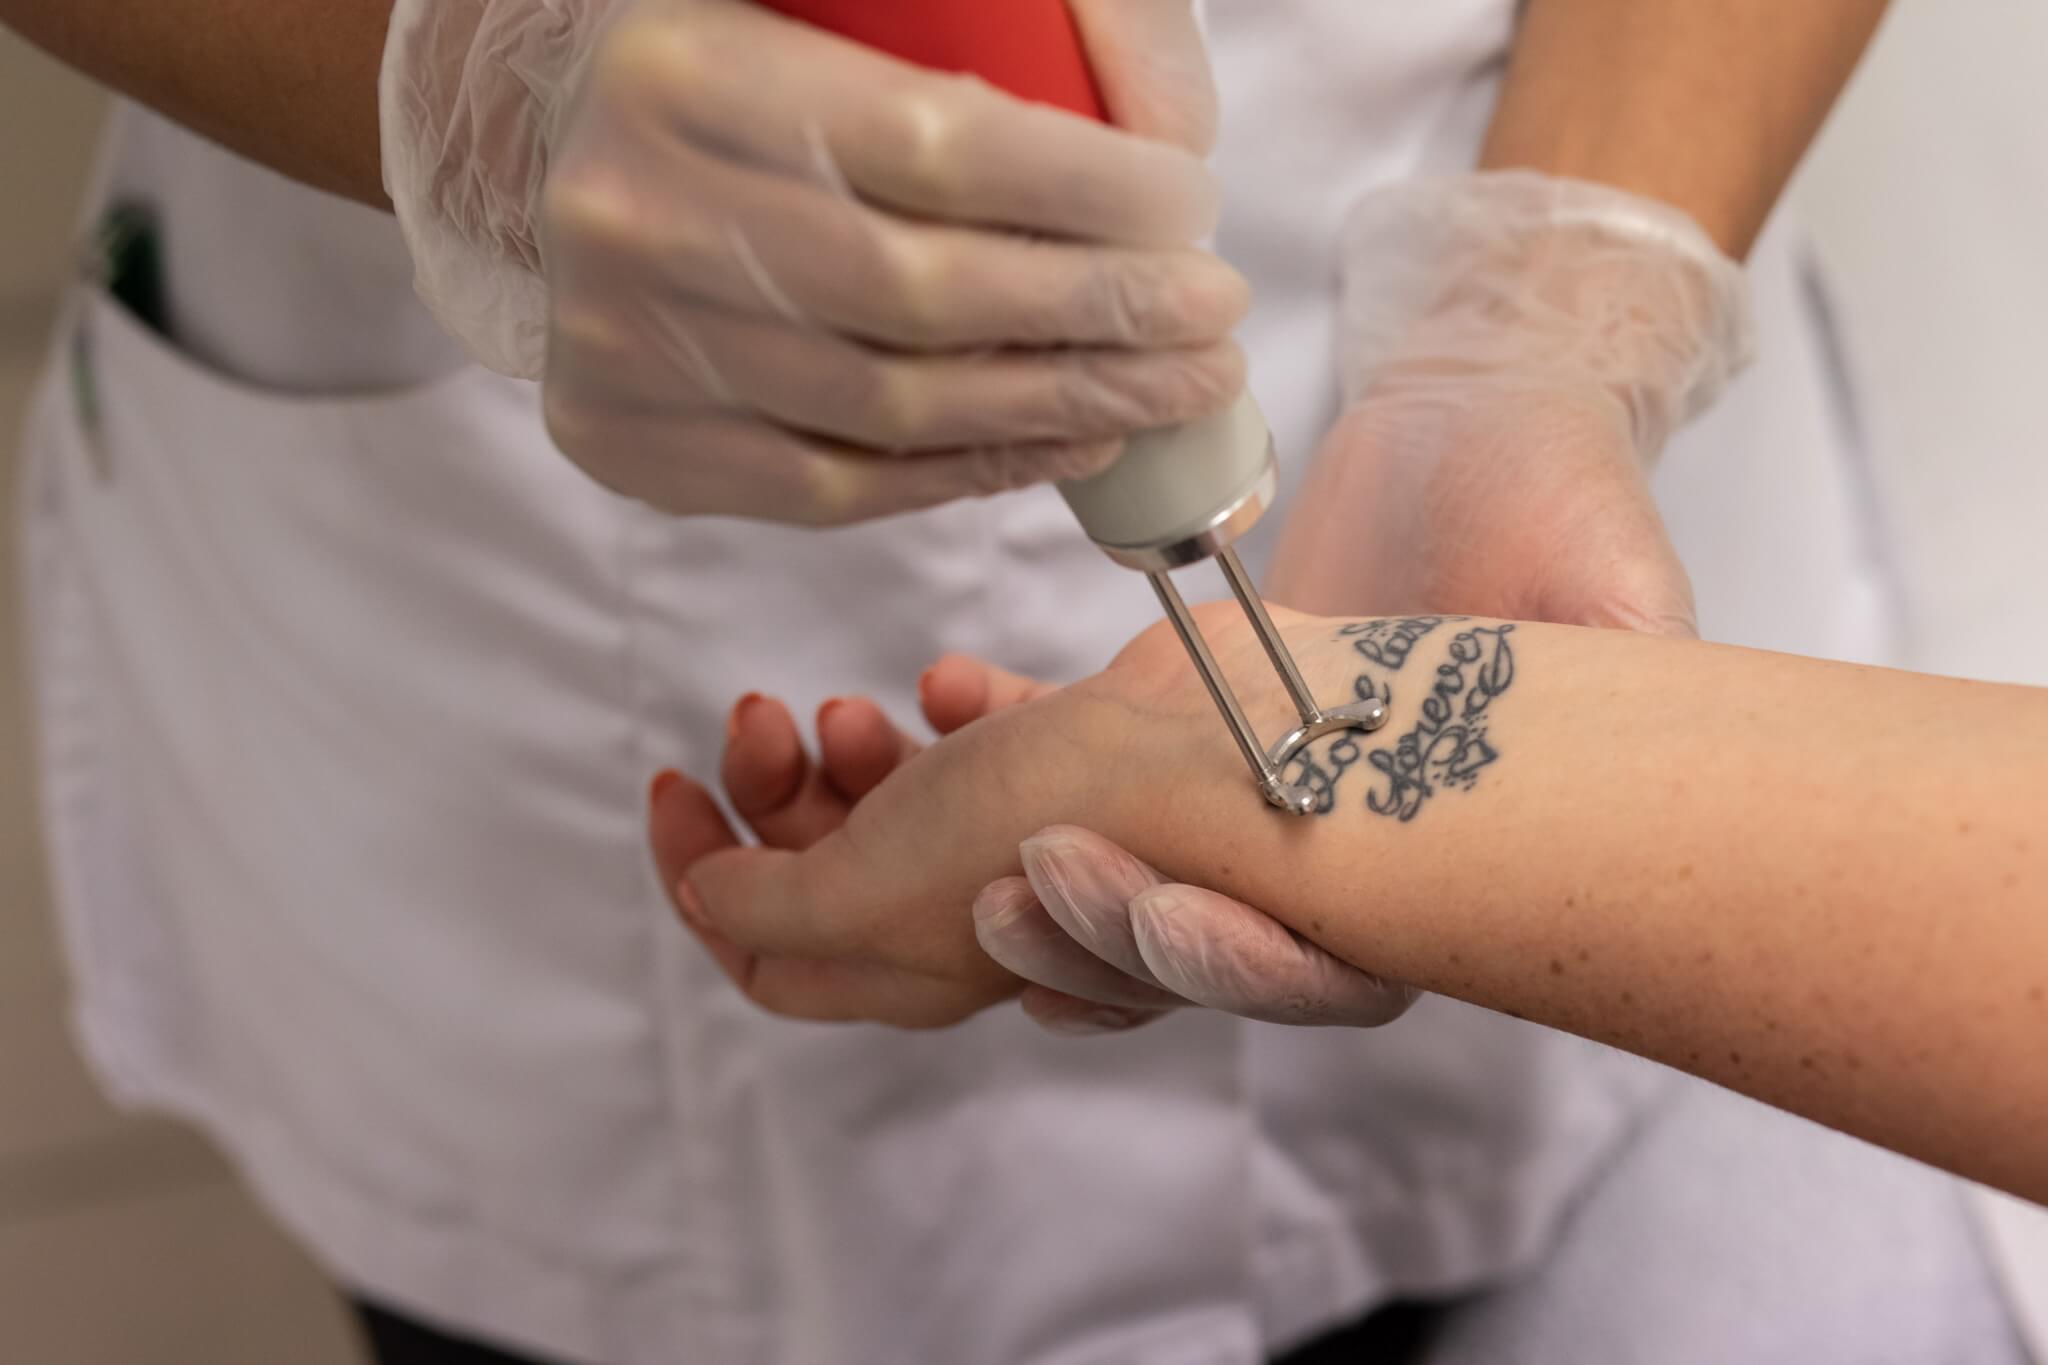 Is Tattoo Removal The Right Option For Me?